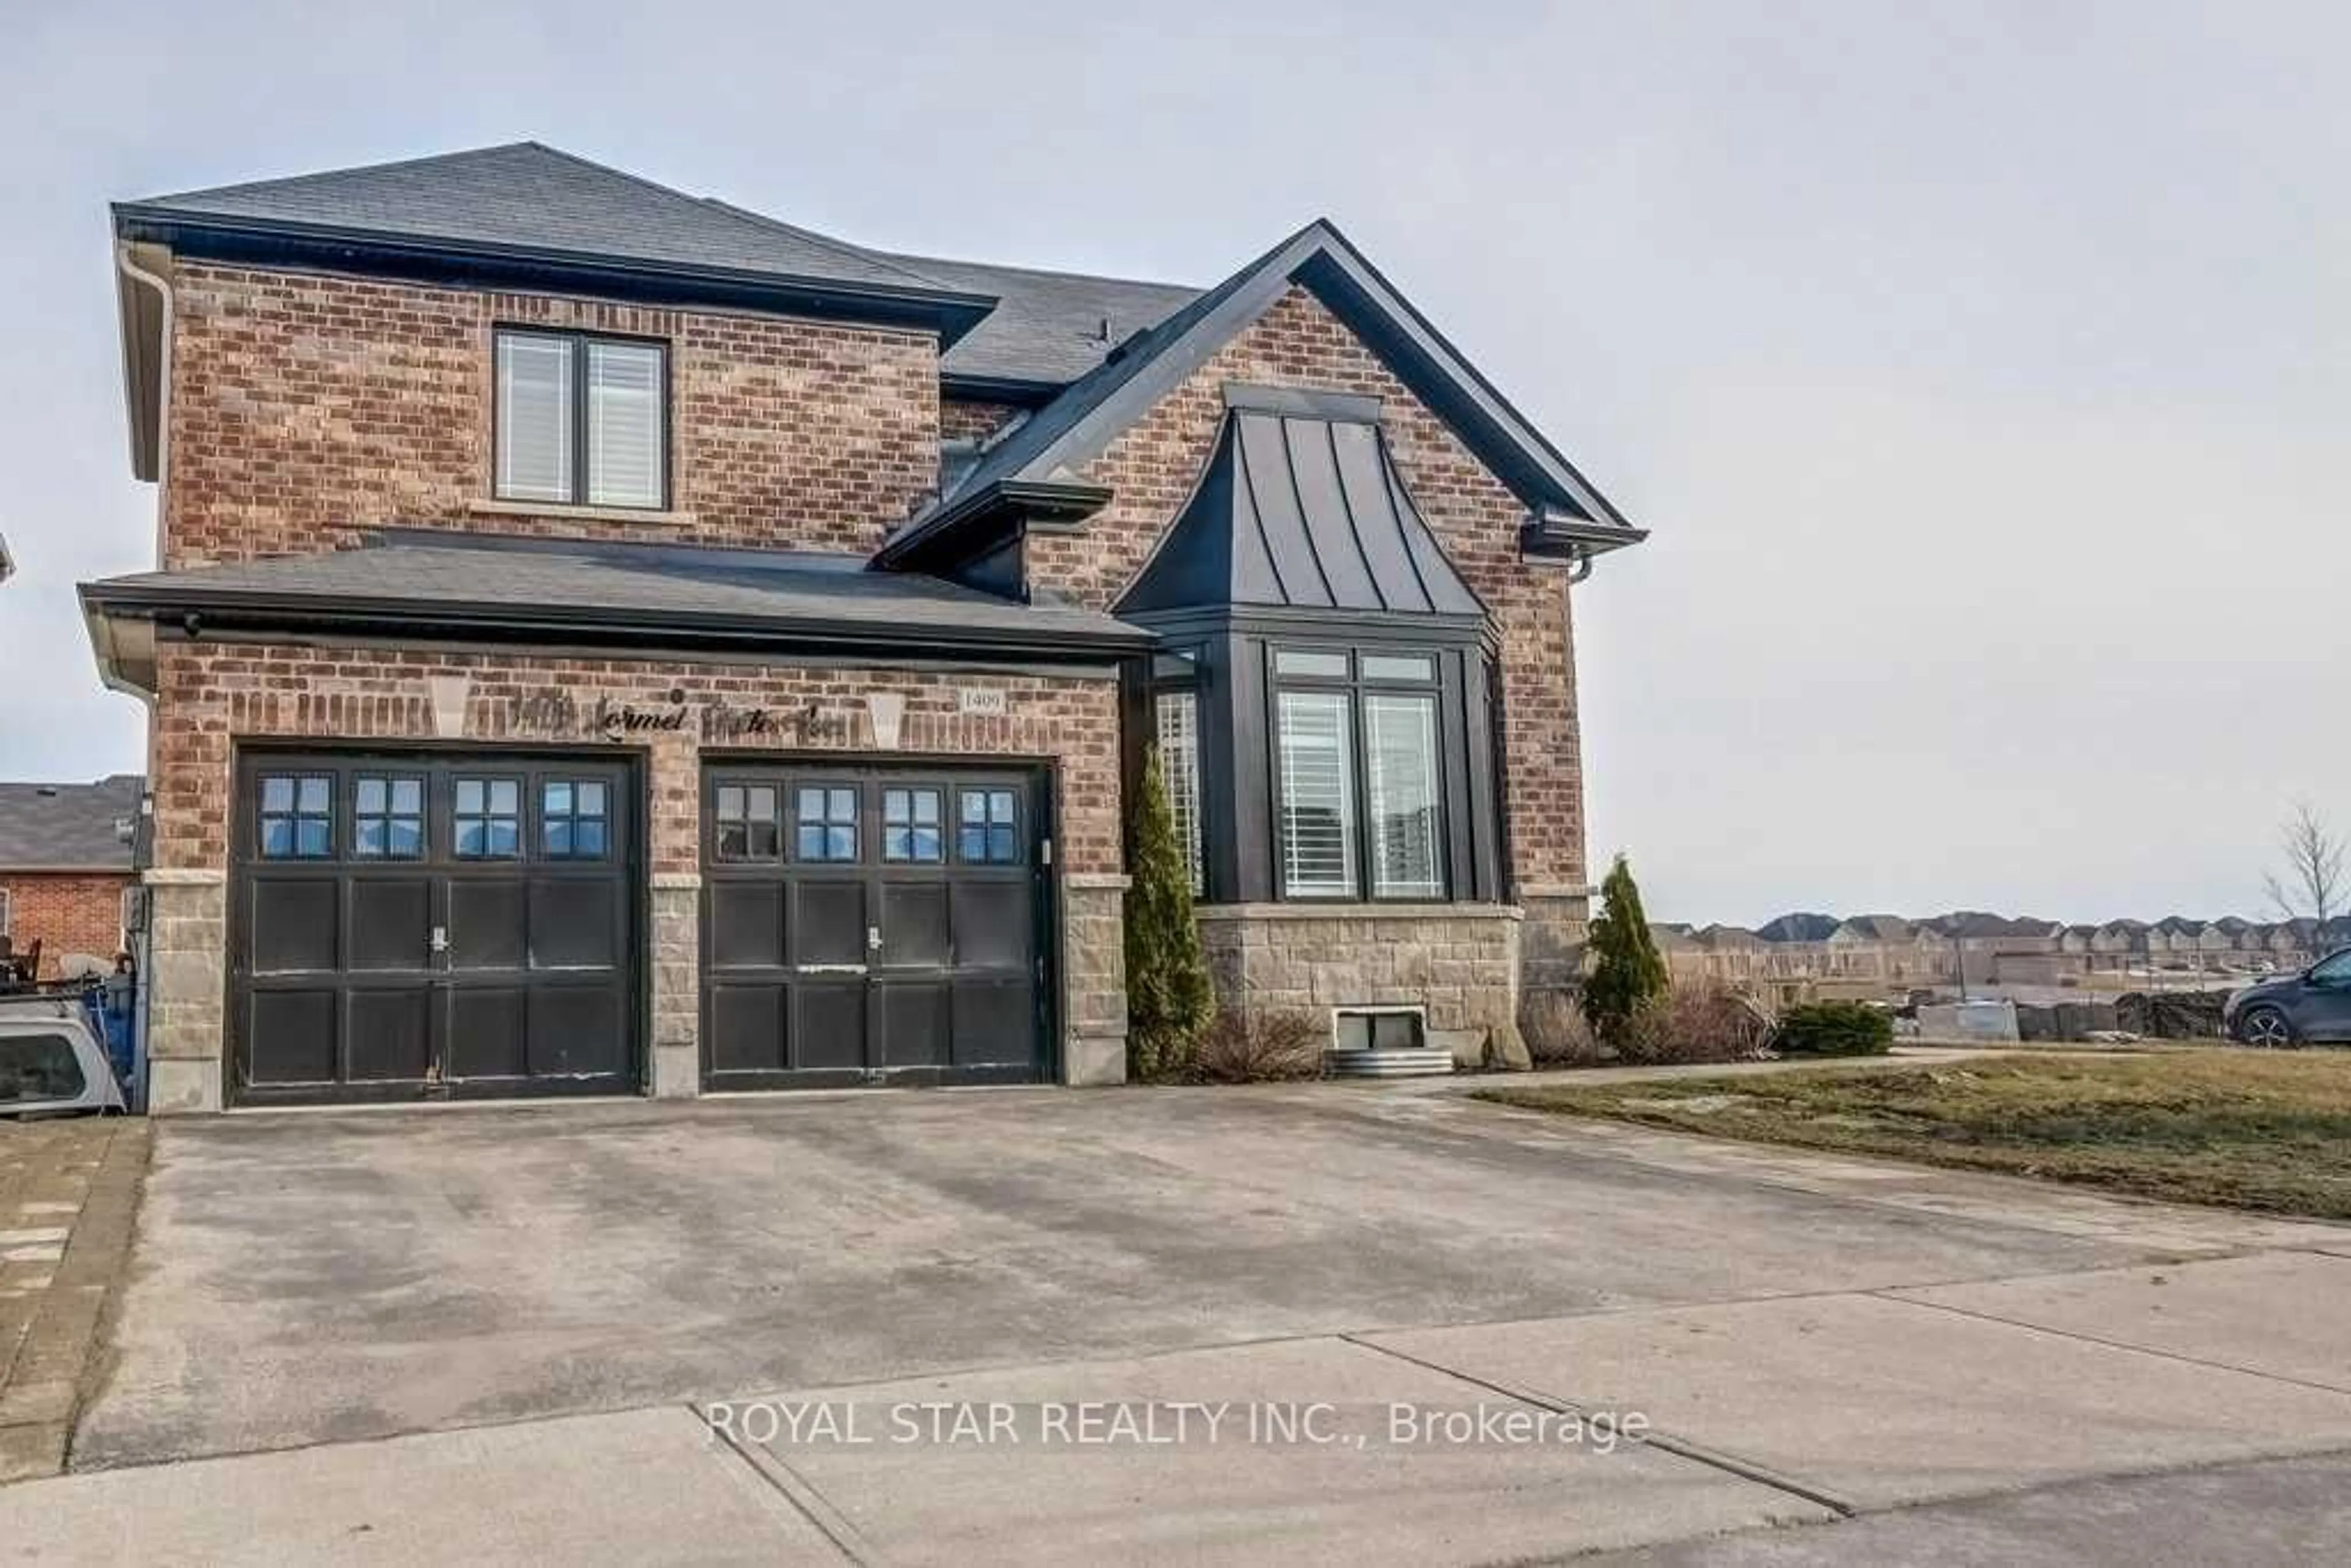 Home with brick exterior material for 1409 Lormel Gate Ave, Innisfil Ontario L0L 1W0